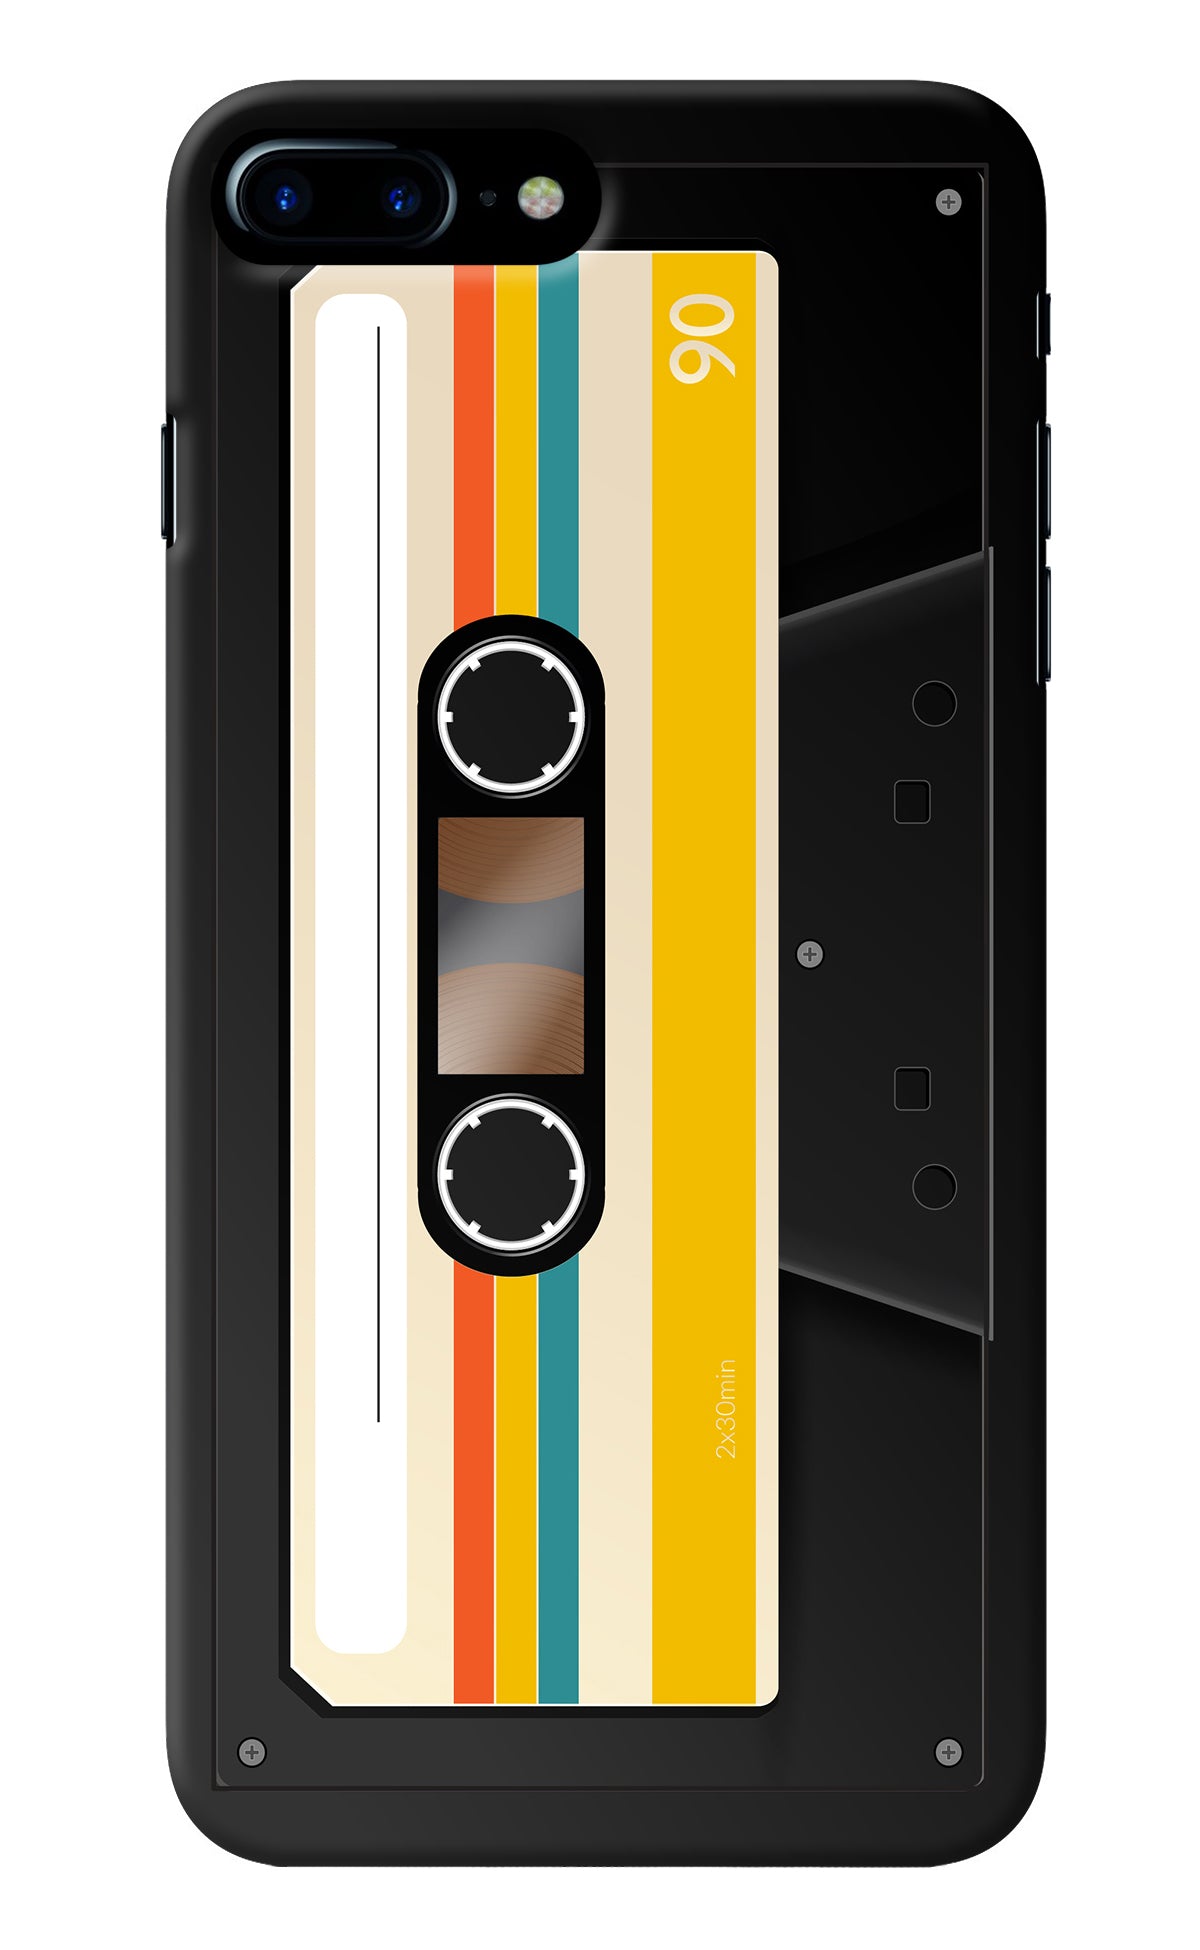 Tape Cassette iPhone 7 Plus Back Cover